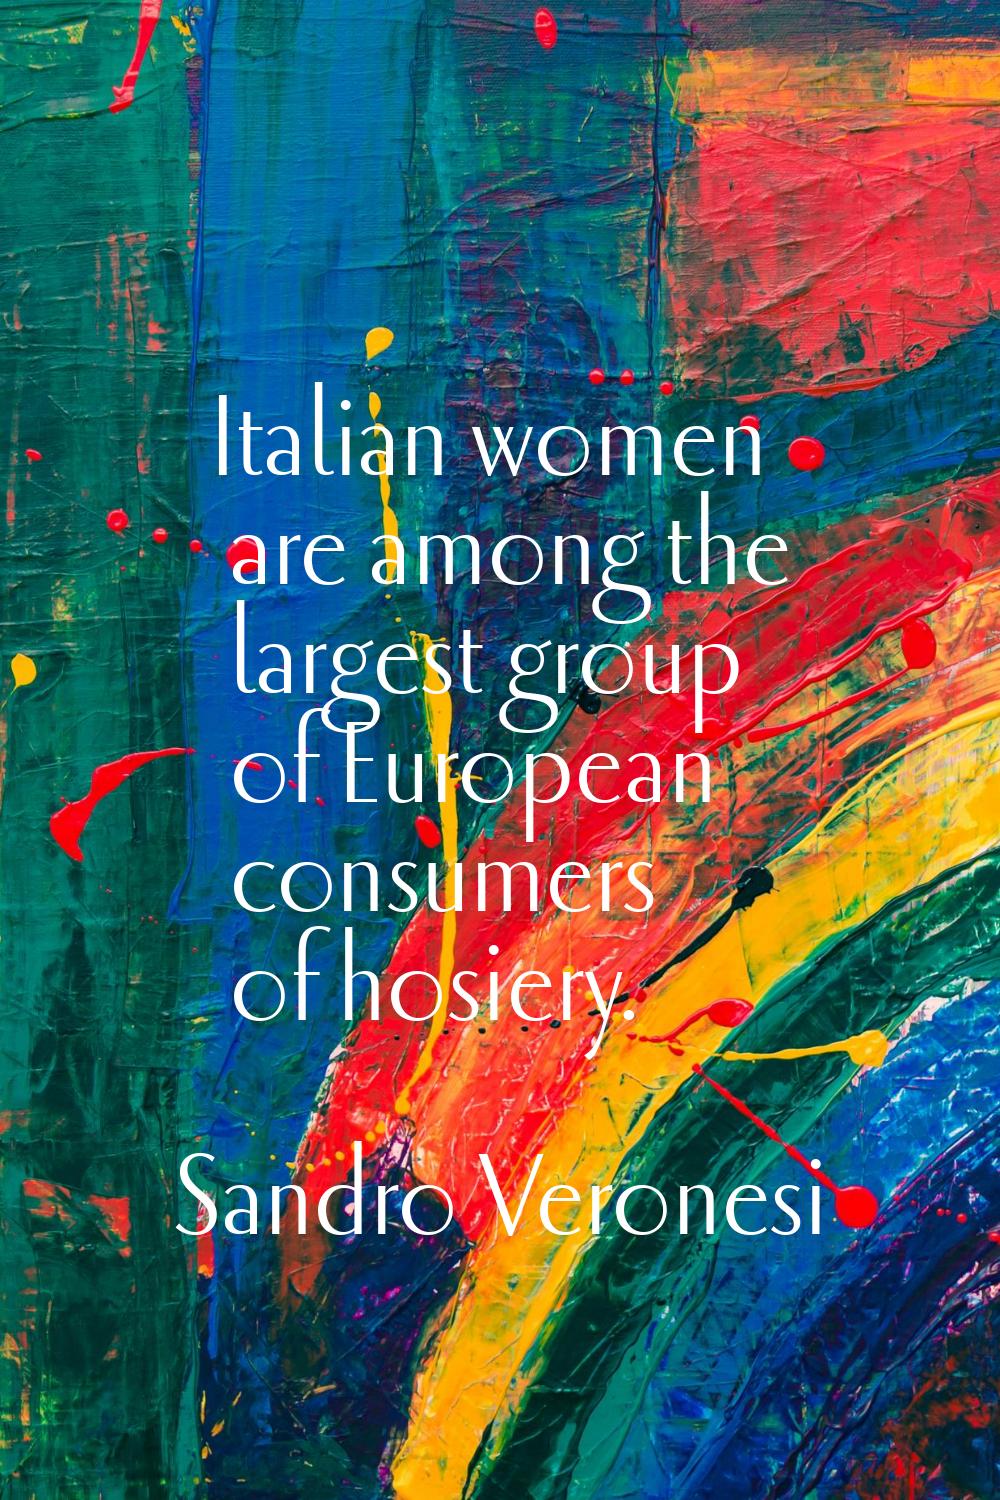 Italian women are among the largest group of European consumers of hosiery.